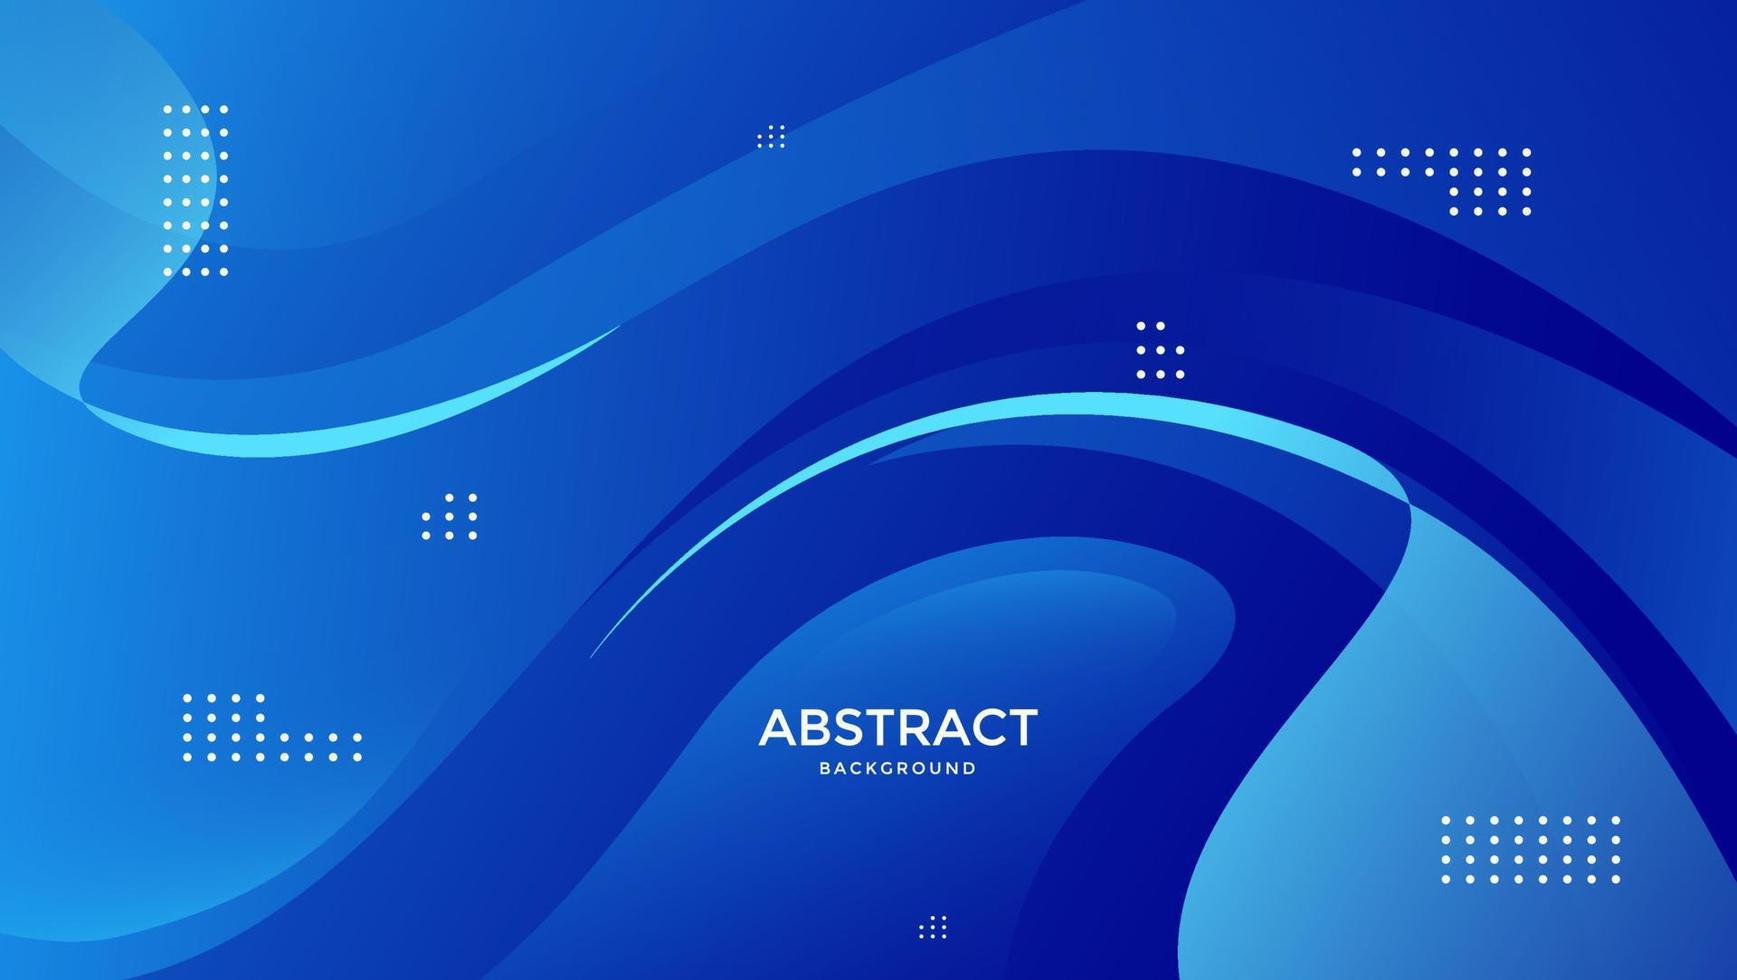 Blue gradient modern background. Suitable for templates, banners, posters, flyers and more. vector